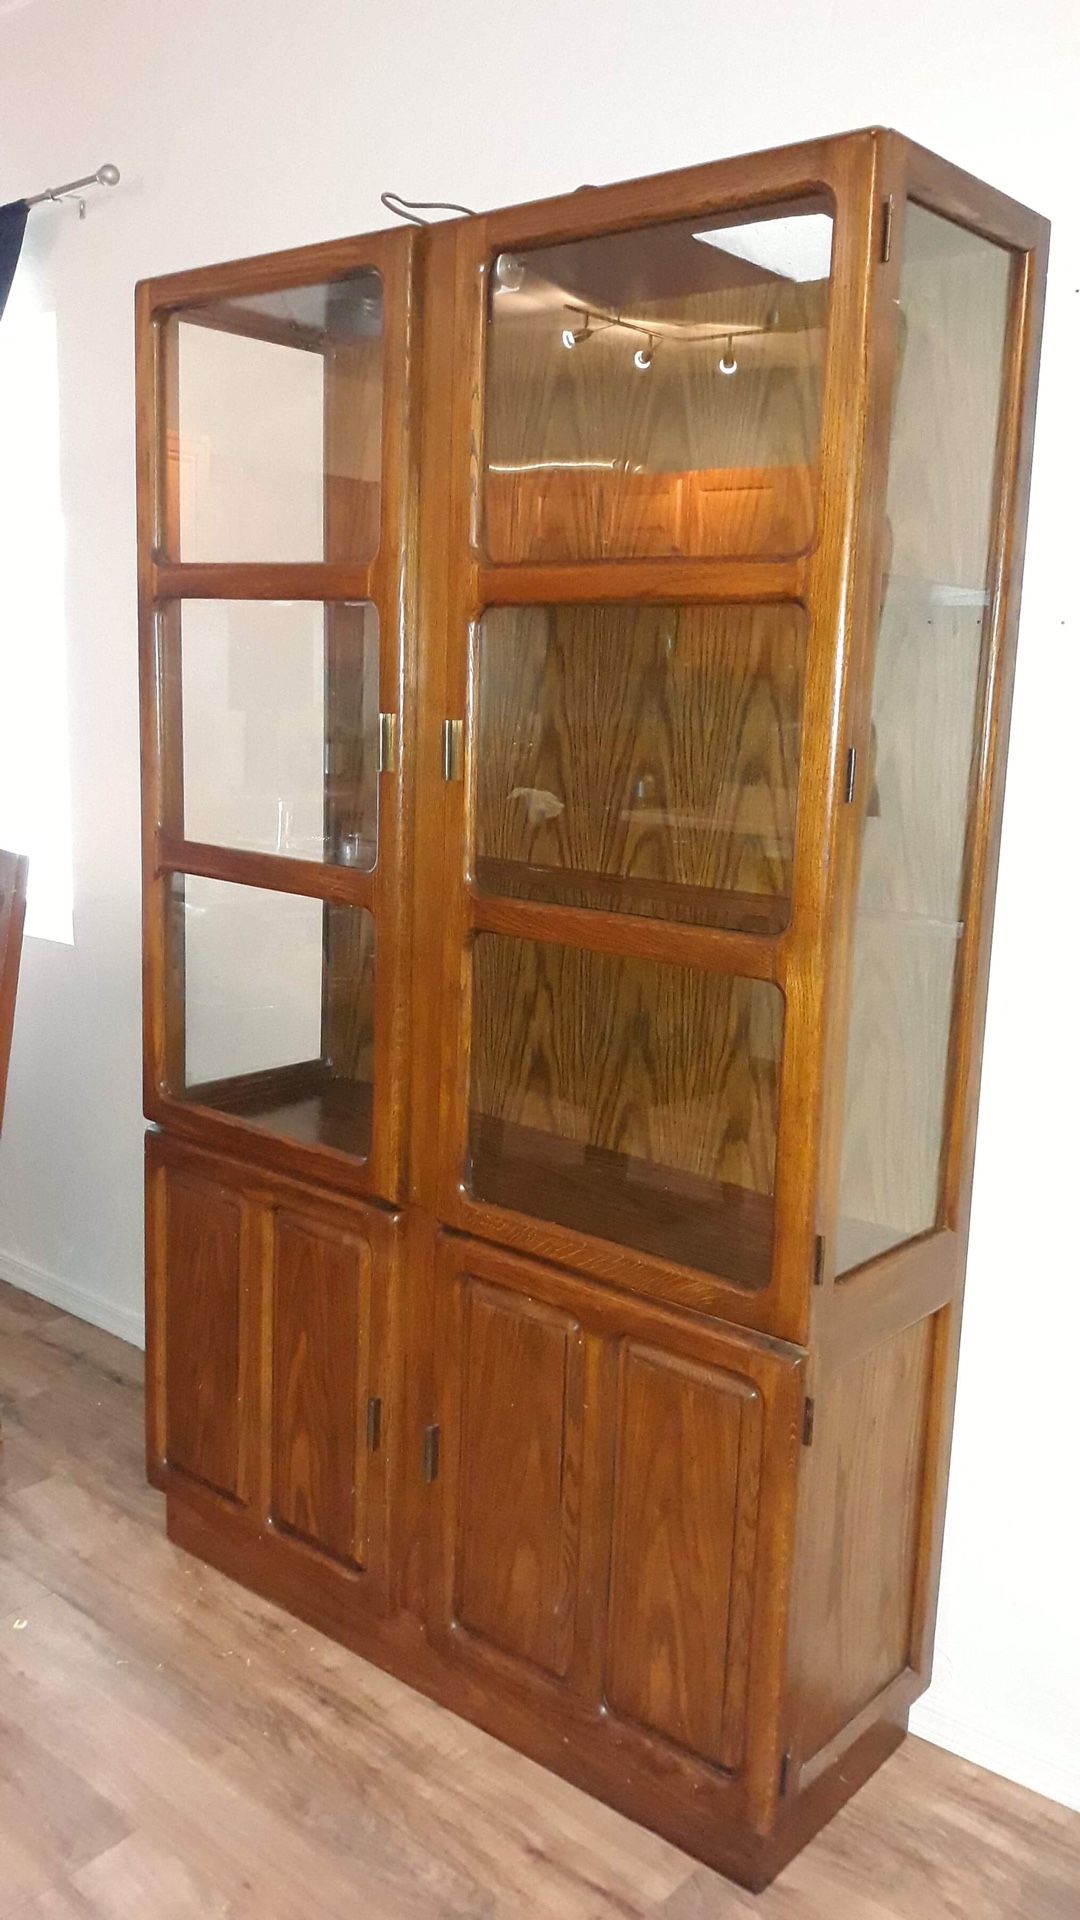 Wood and glass cabinet